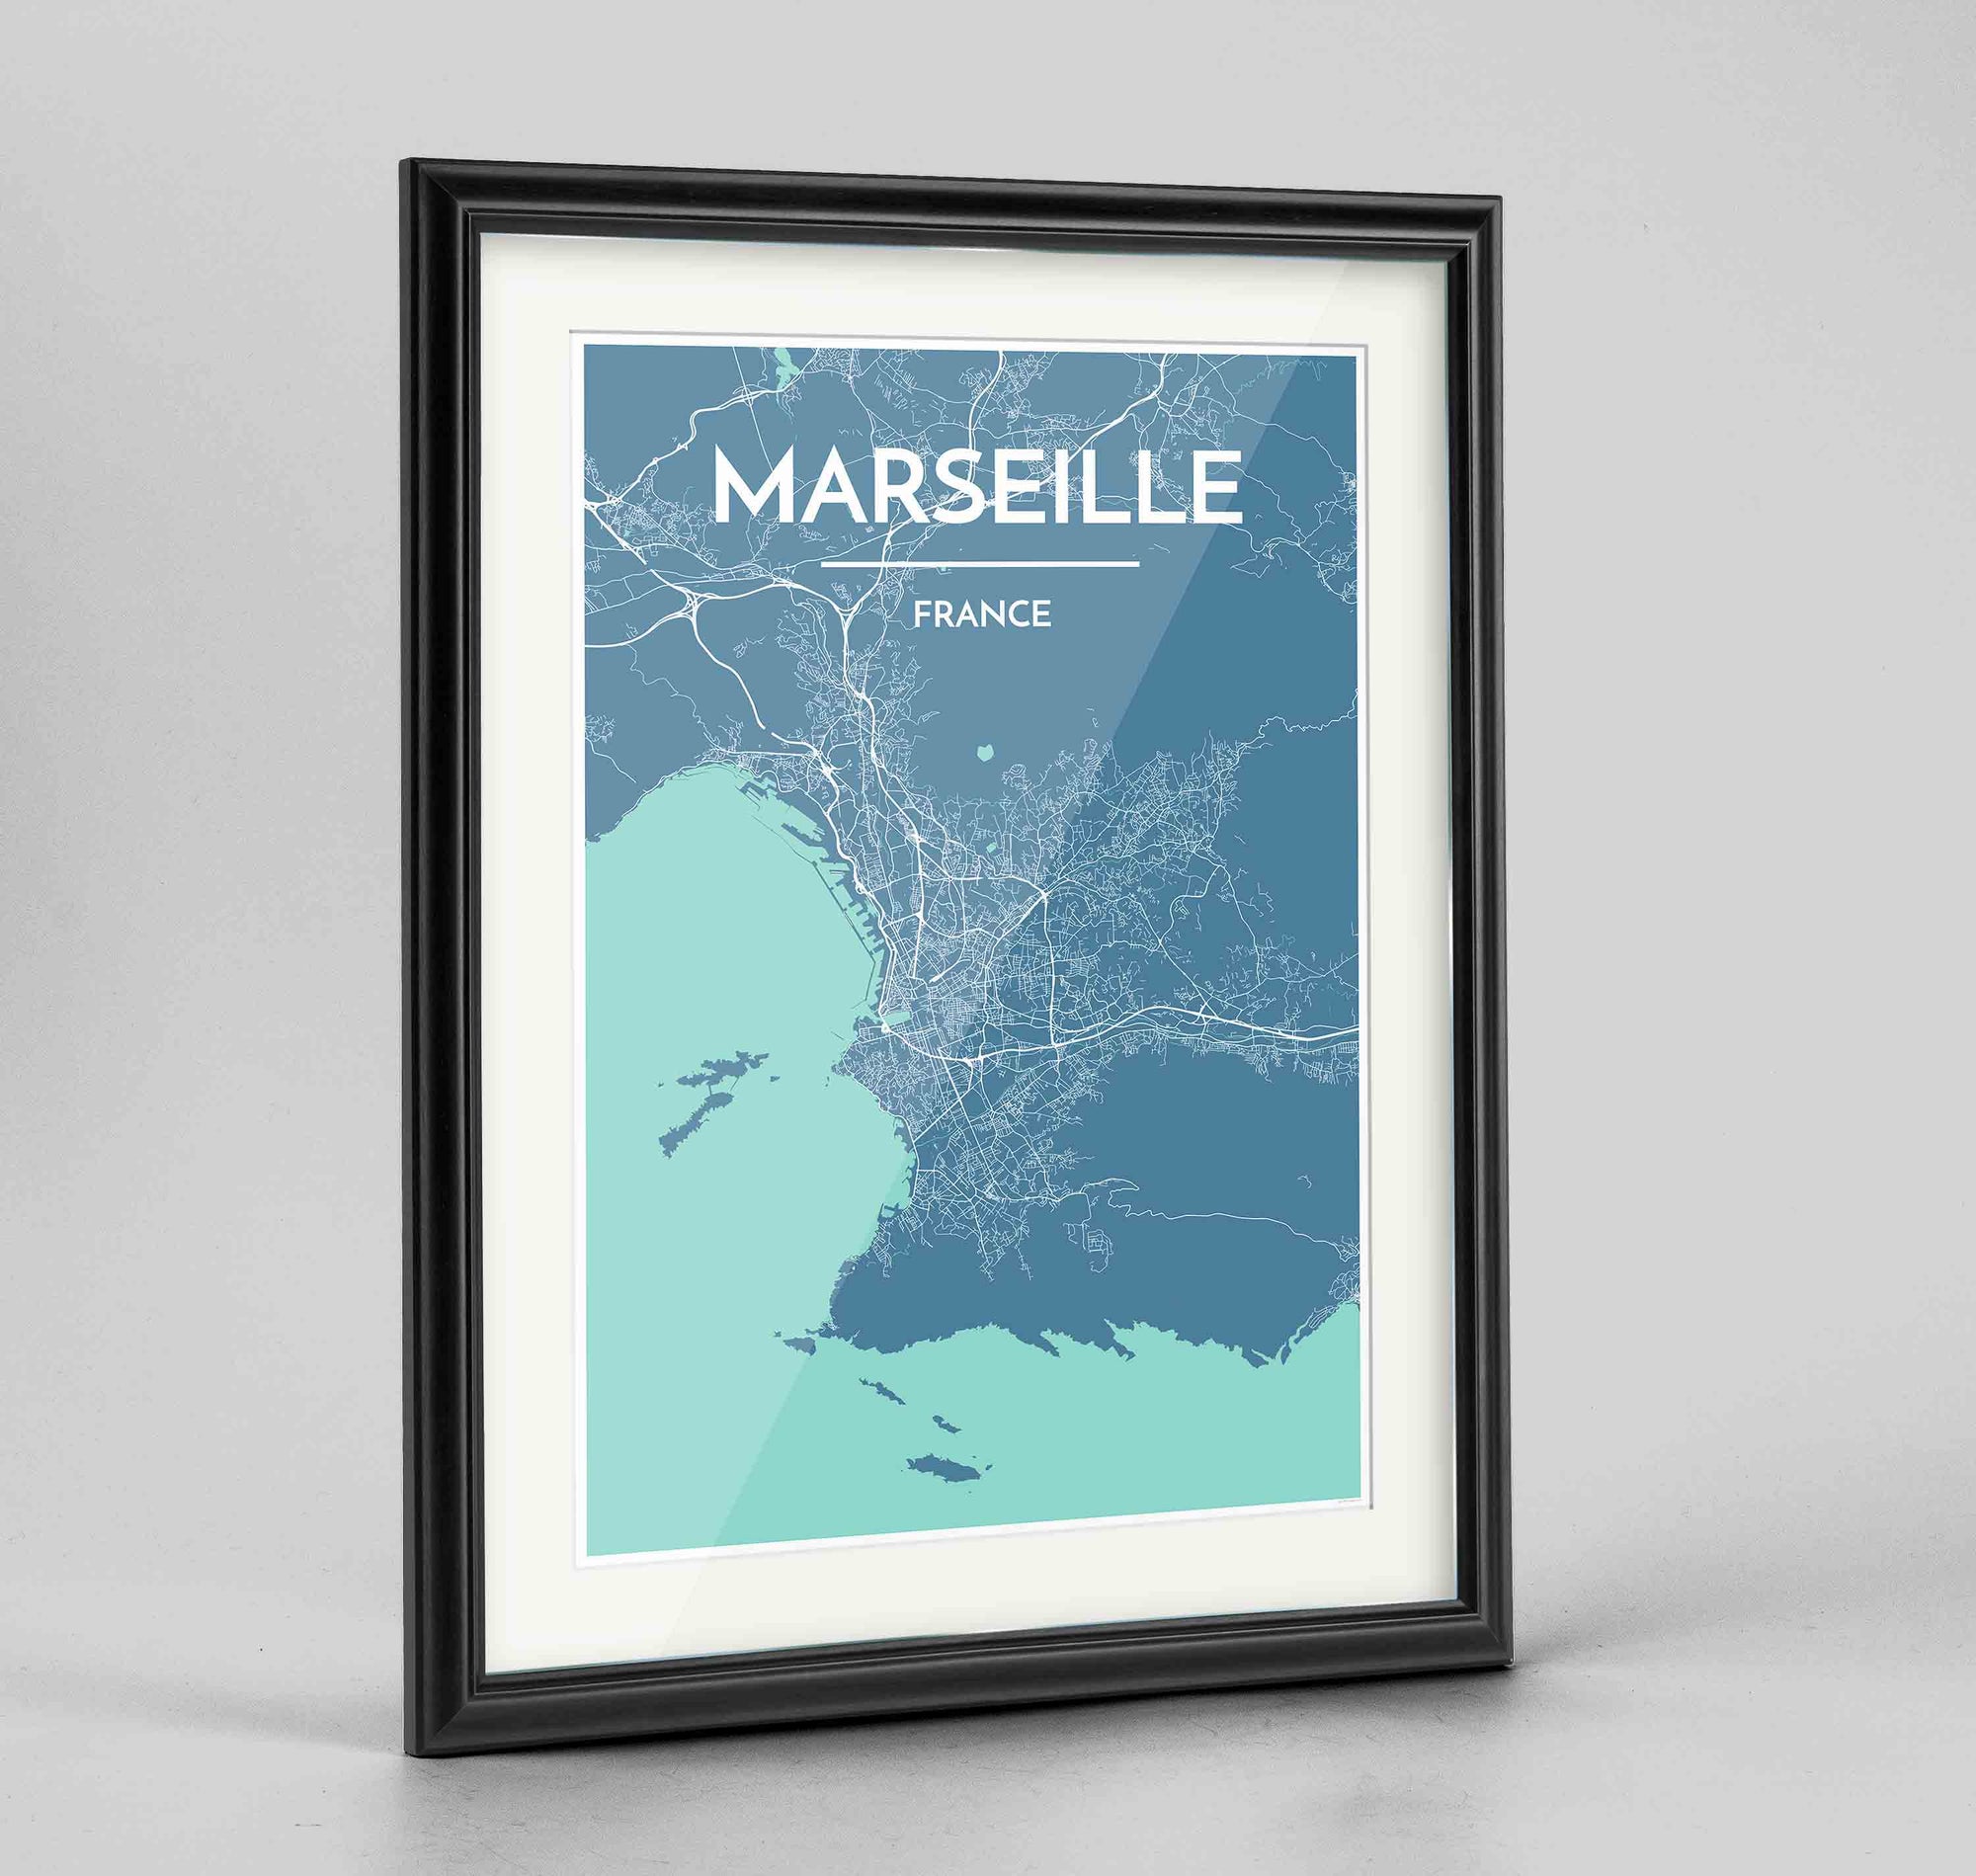 Framed Marseille Map Art Print 24x36" Traditional Black frame Point Two Design Group